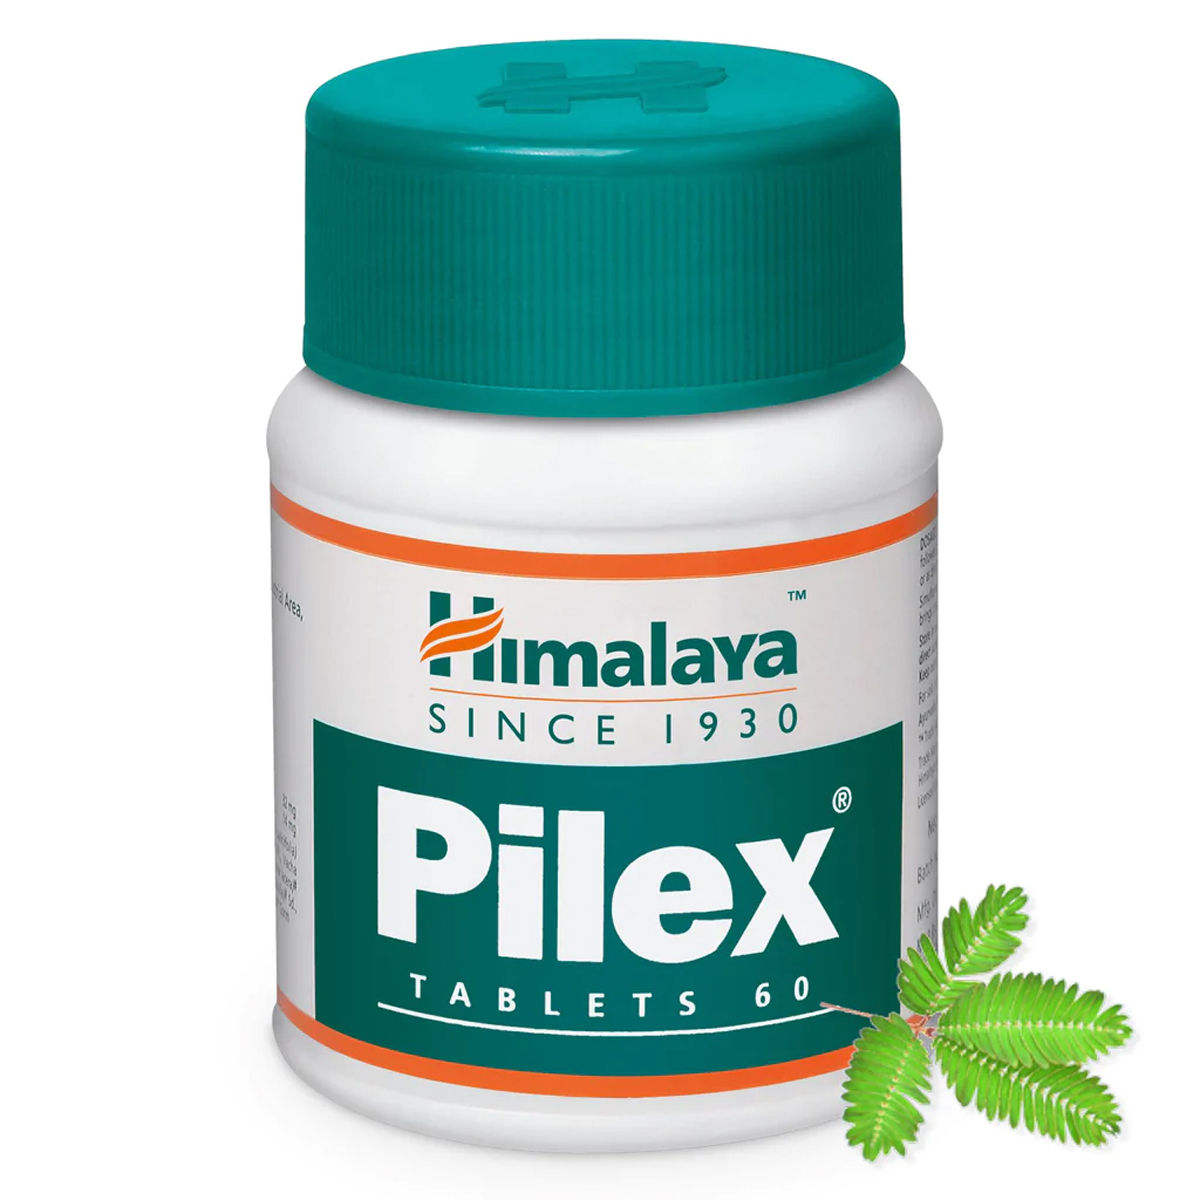 Himalaya Pilex, 60 Tablets Price, Uses, Side Effects, Composition - Apollo  Pharmacy